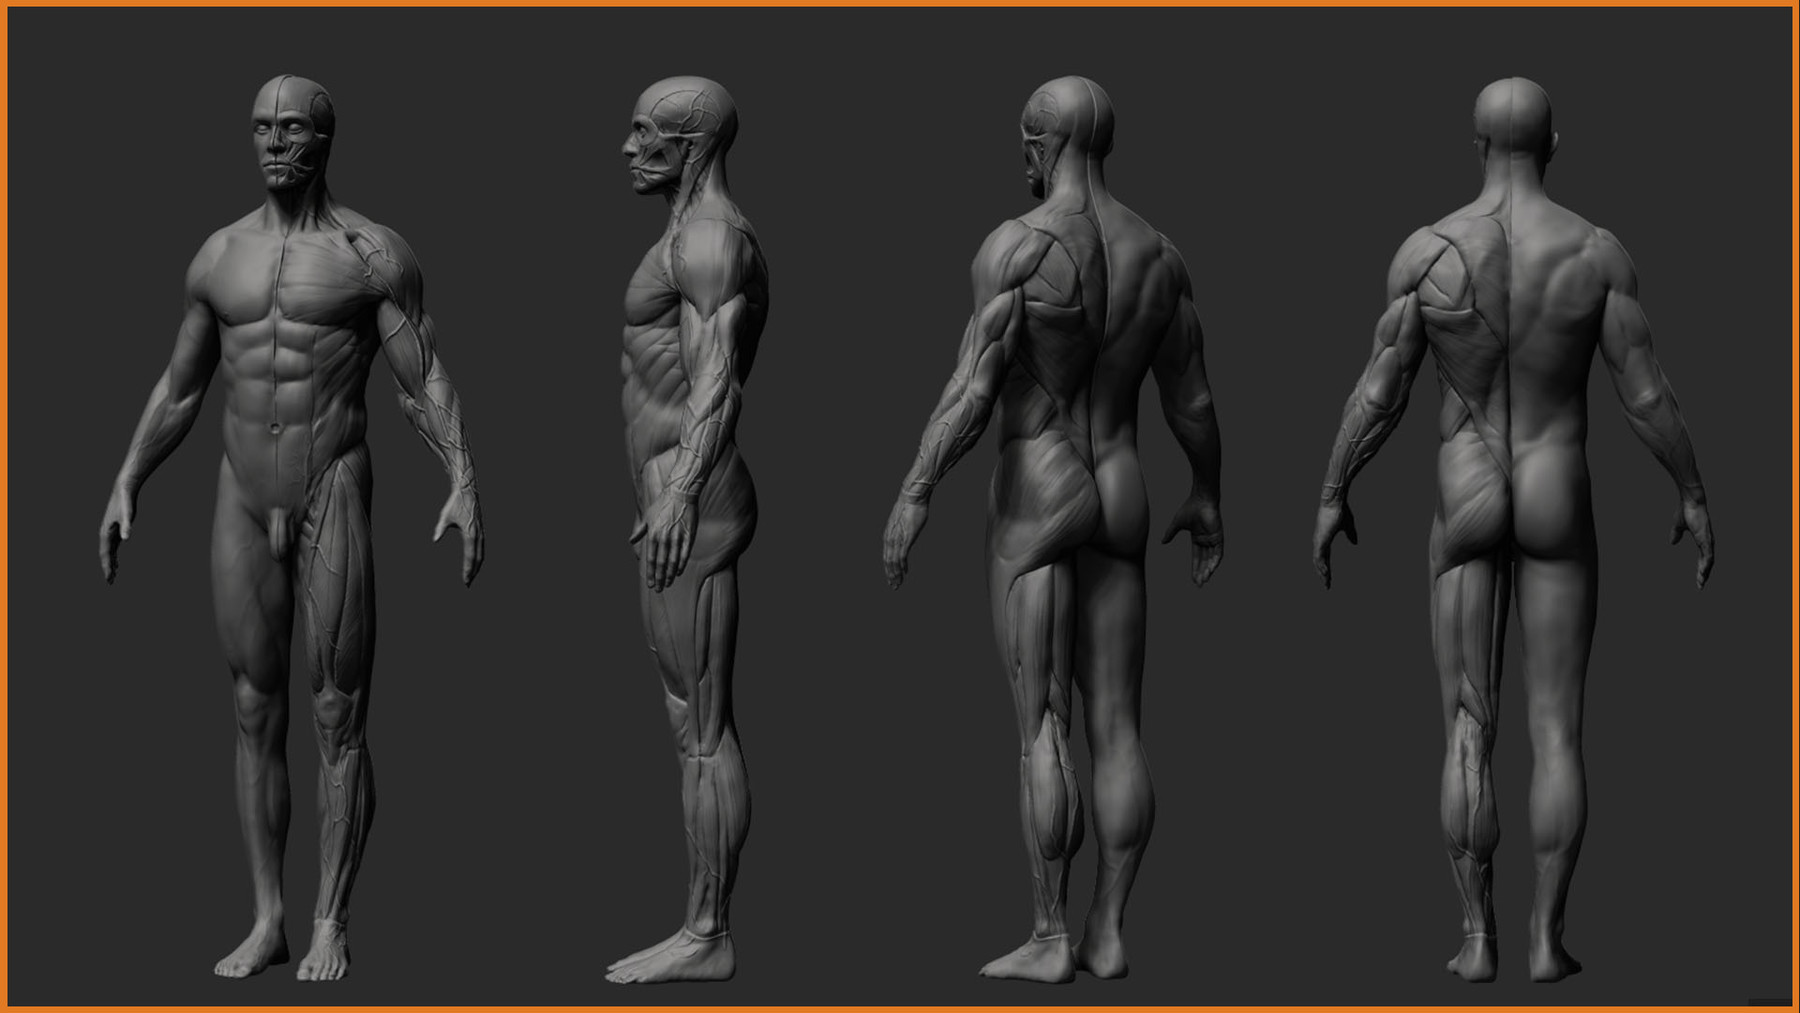 ArtStation Anatomy Male Tool Reference for Artists ! Resources